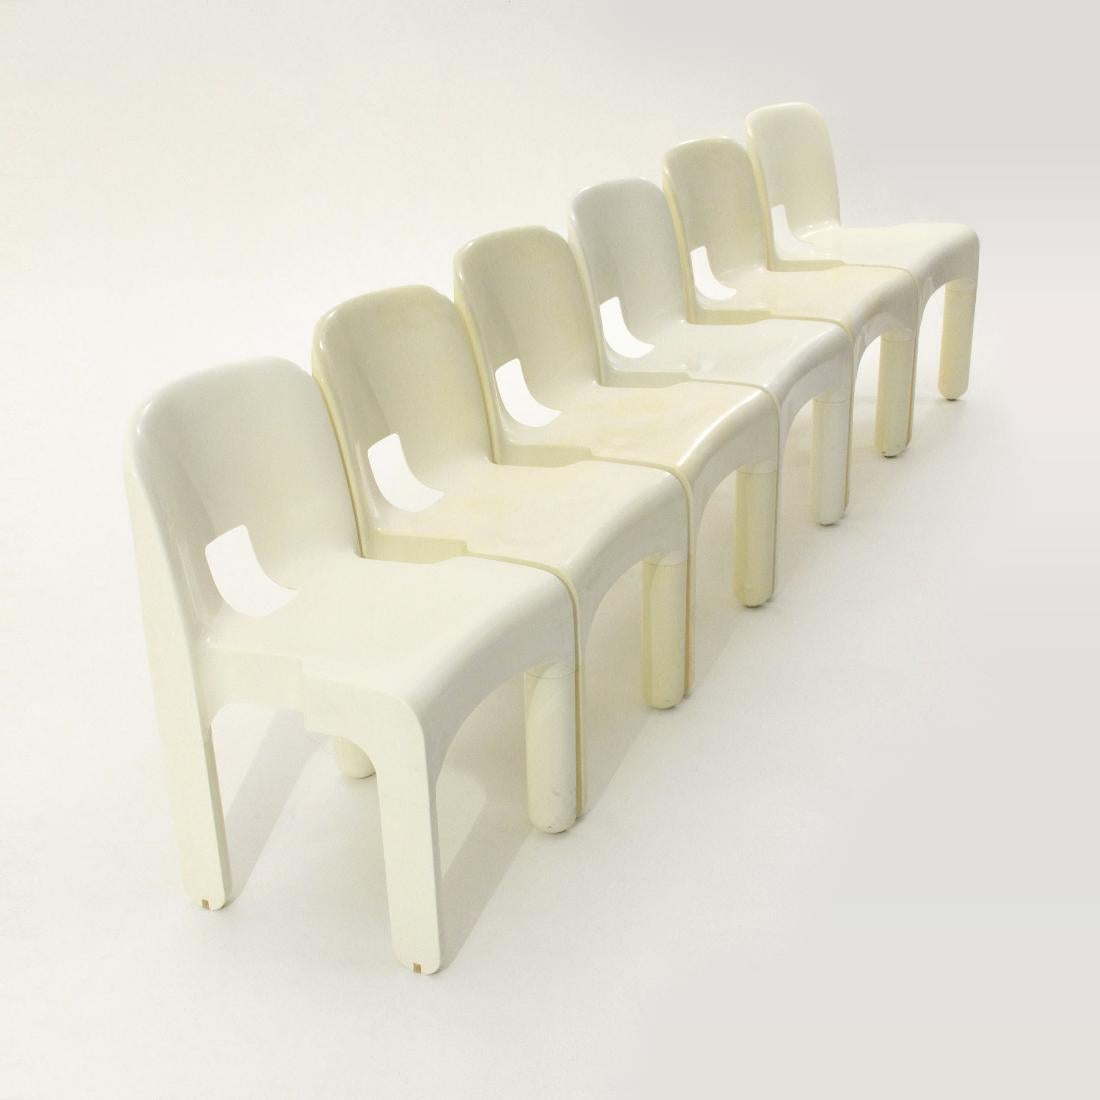 Mid-Century Modern 6 “4860” Chairs in White Plastic by Joe Colombo for Kartell, 1960s